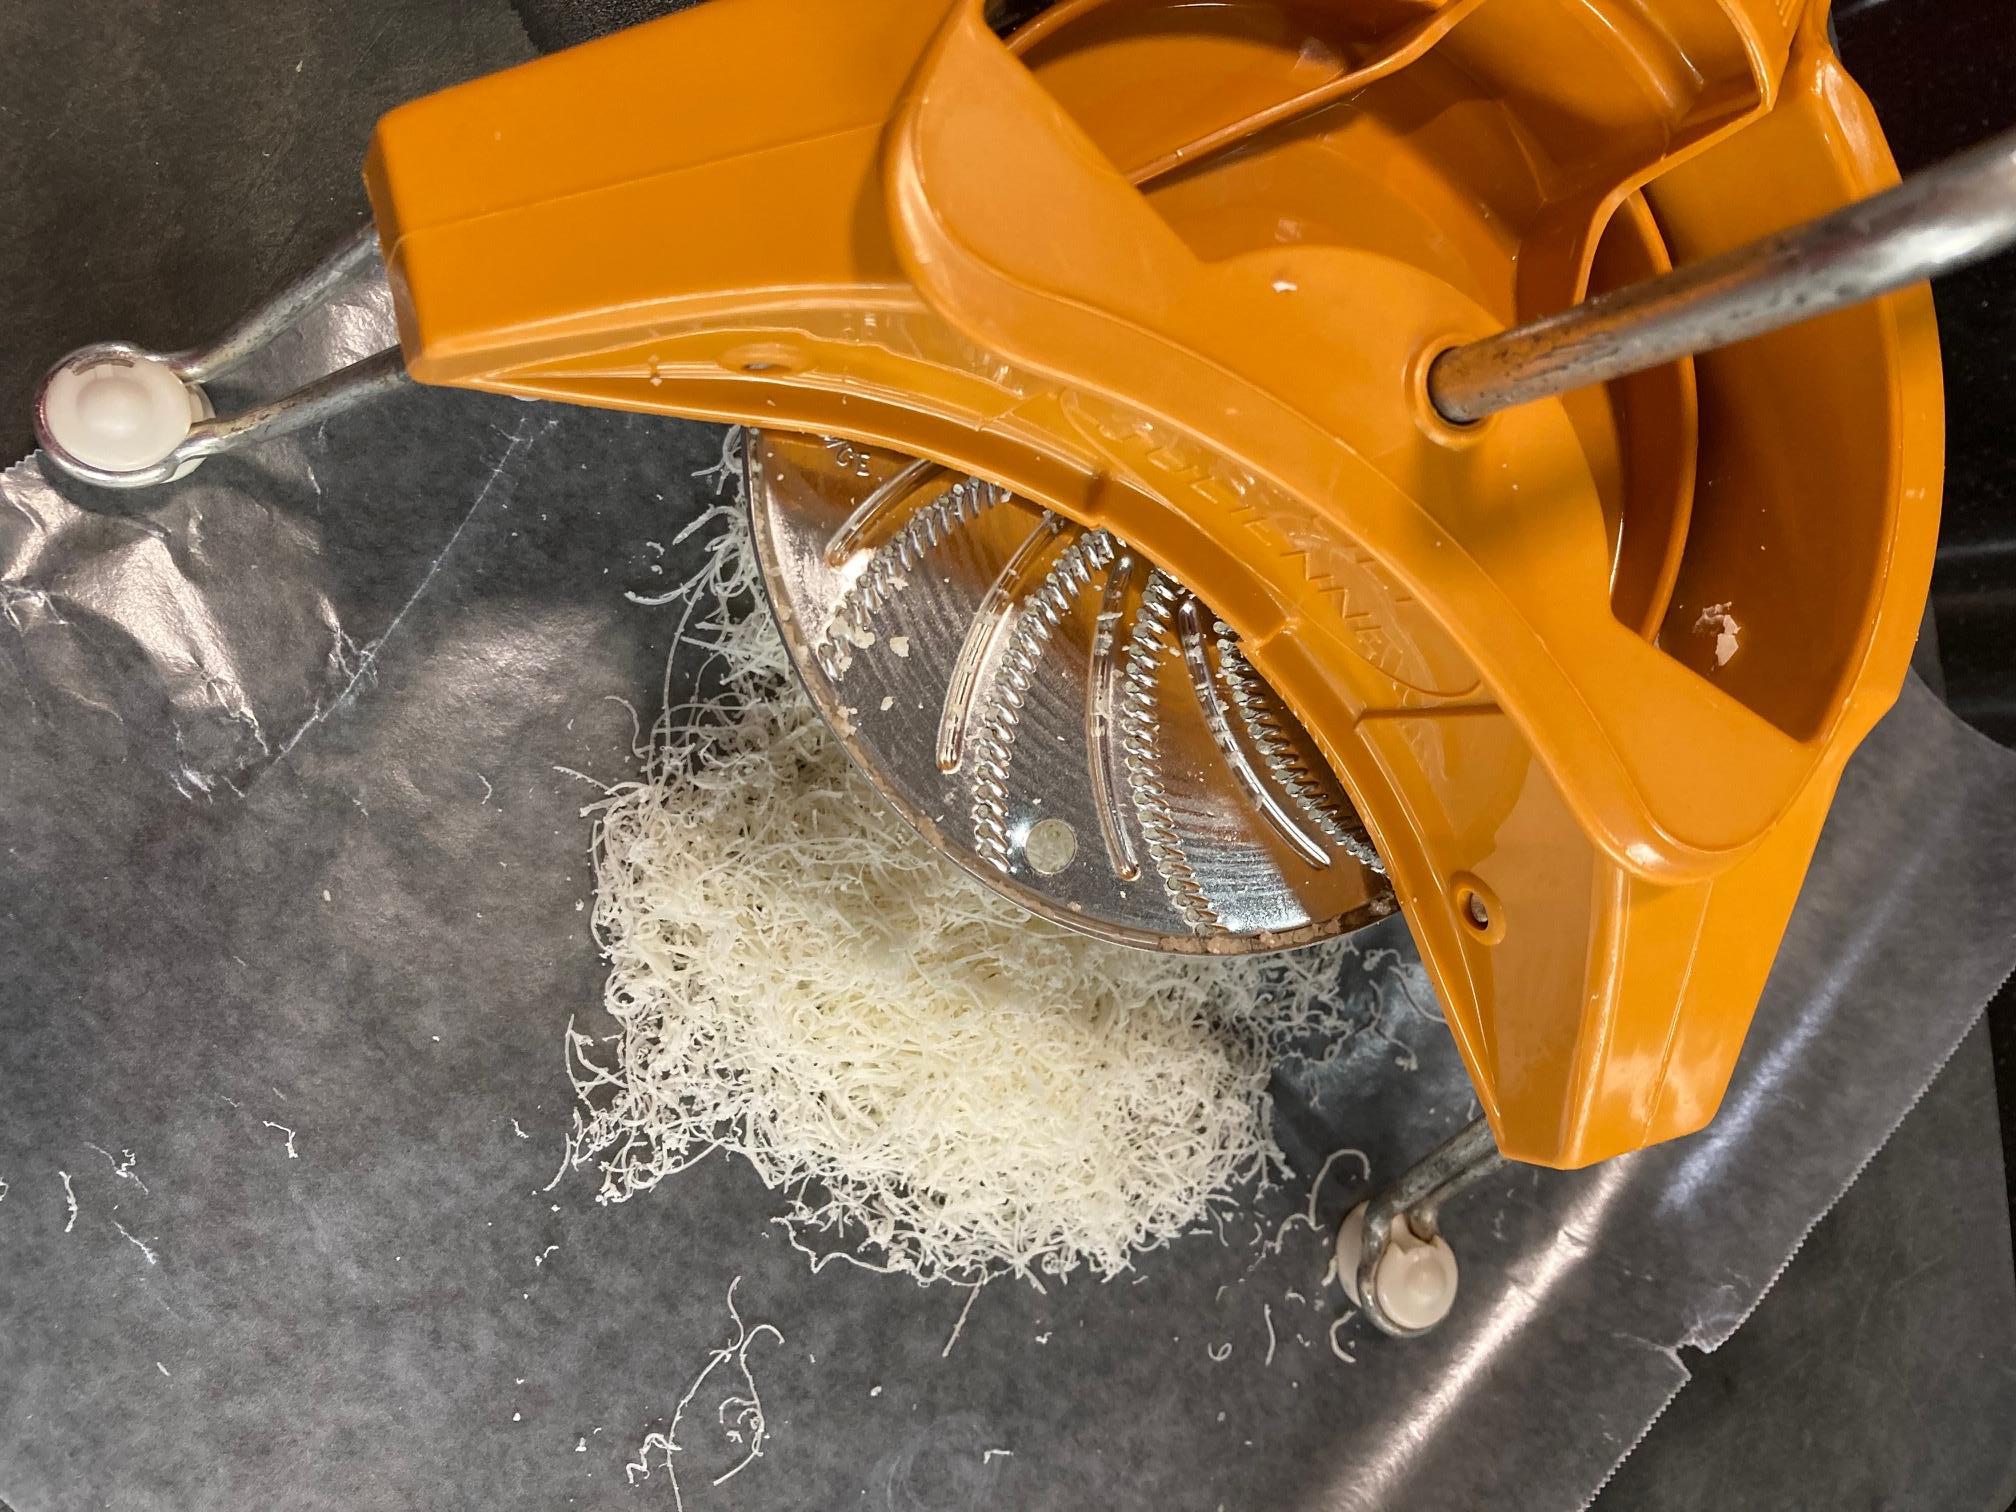 Use the Cuisinart Fine Grater Disc for Perfectly Grated Italian